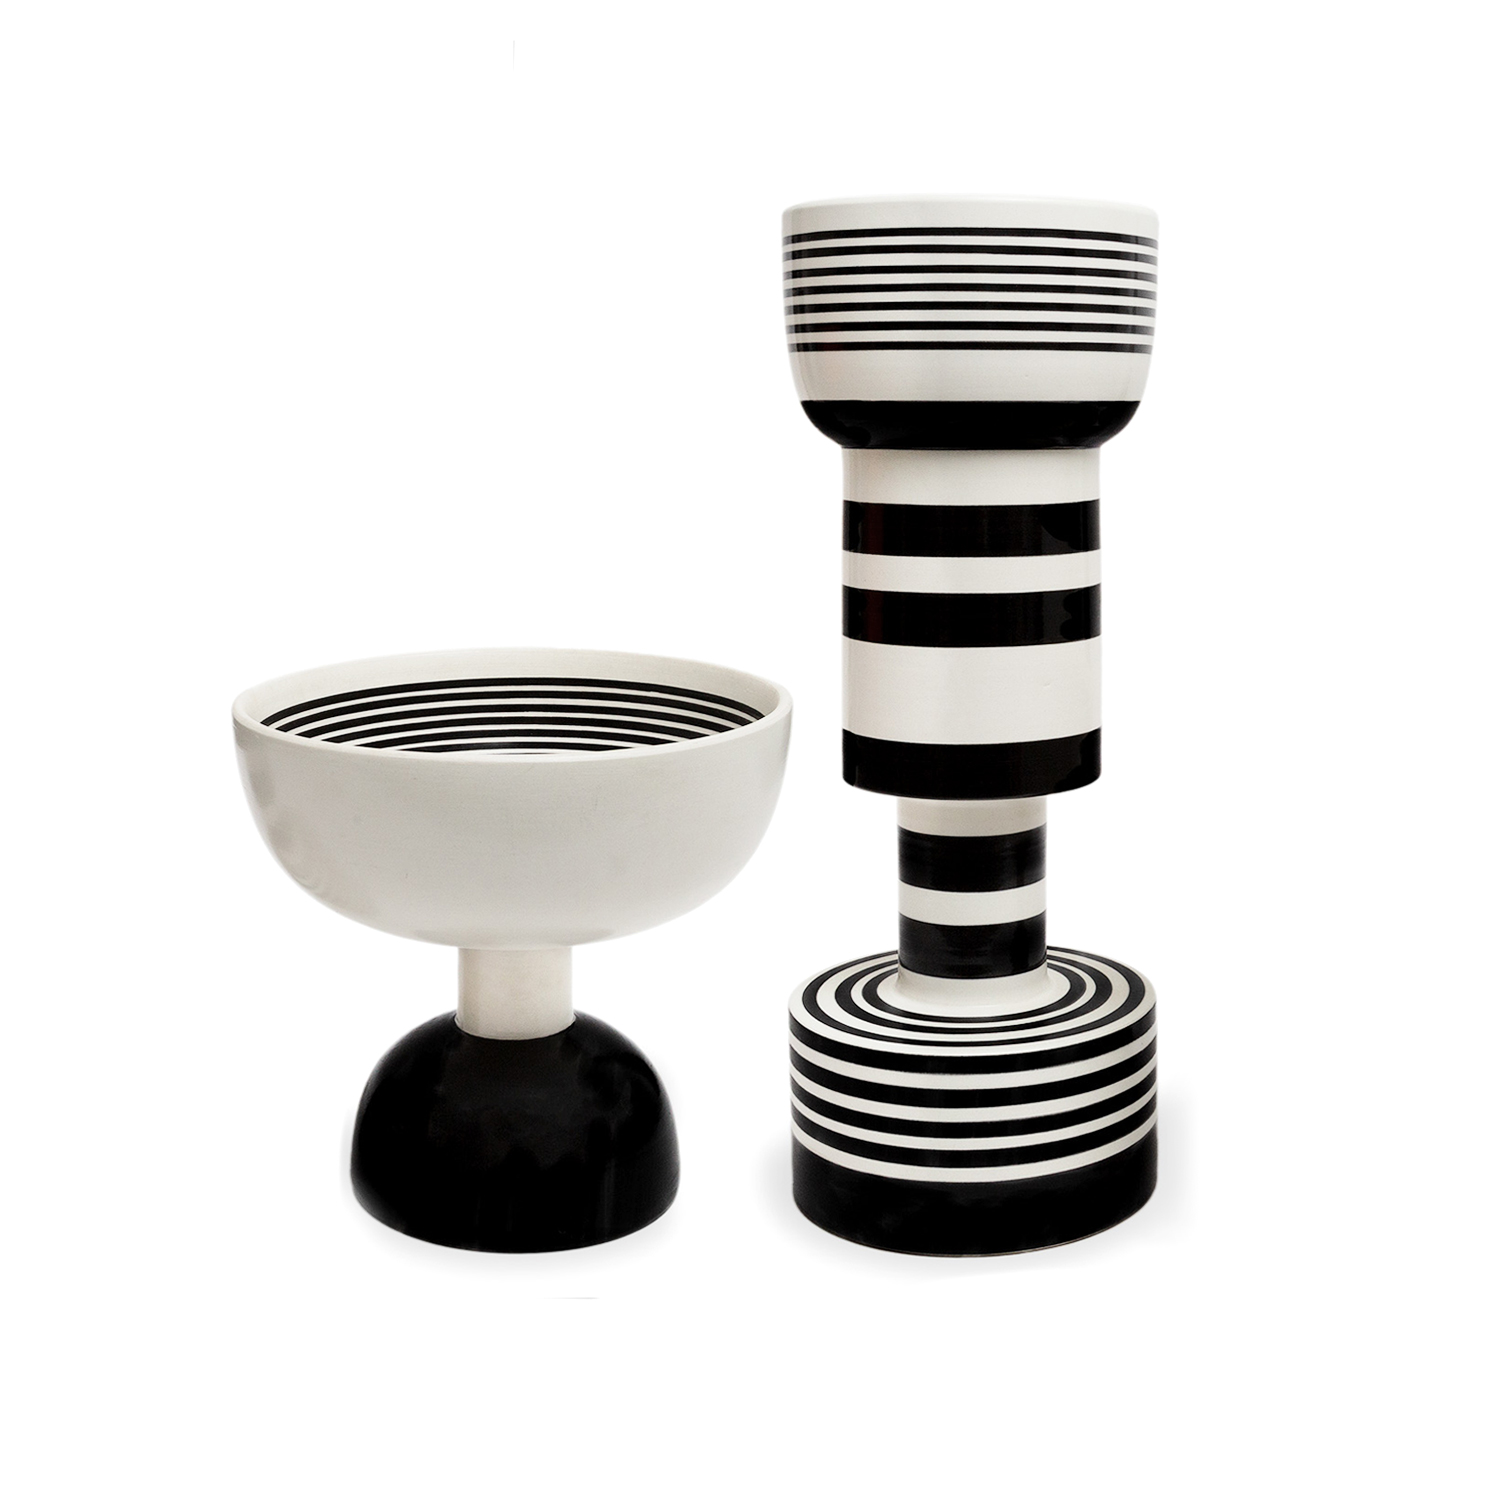 Ettore Sottsass, "Calice" vase, in white and black enameled ceramic, designed in 1959, Bitossi edition, signed, from the 1990's - 00pp